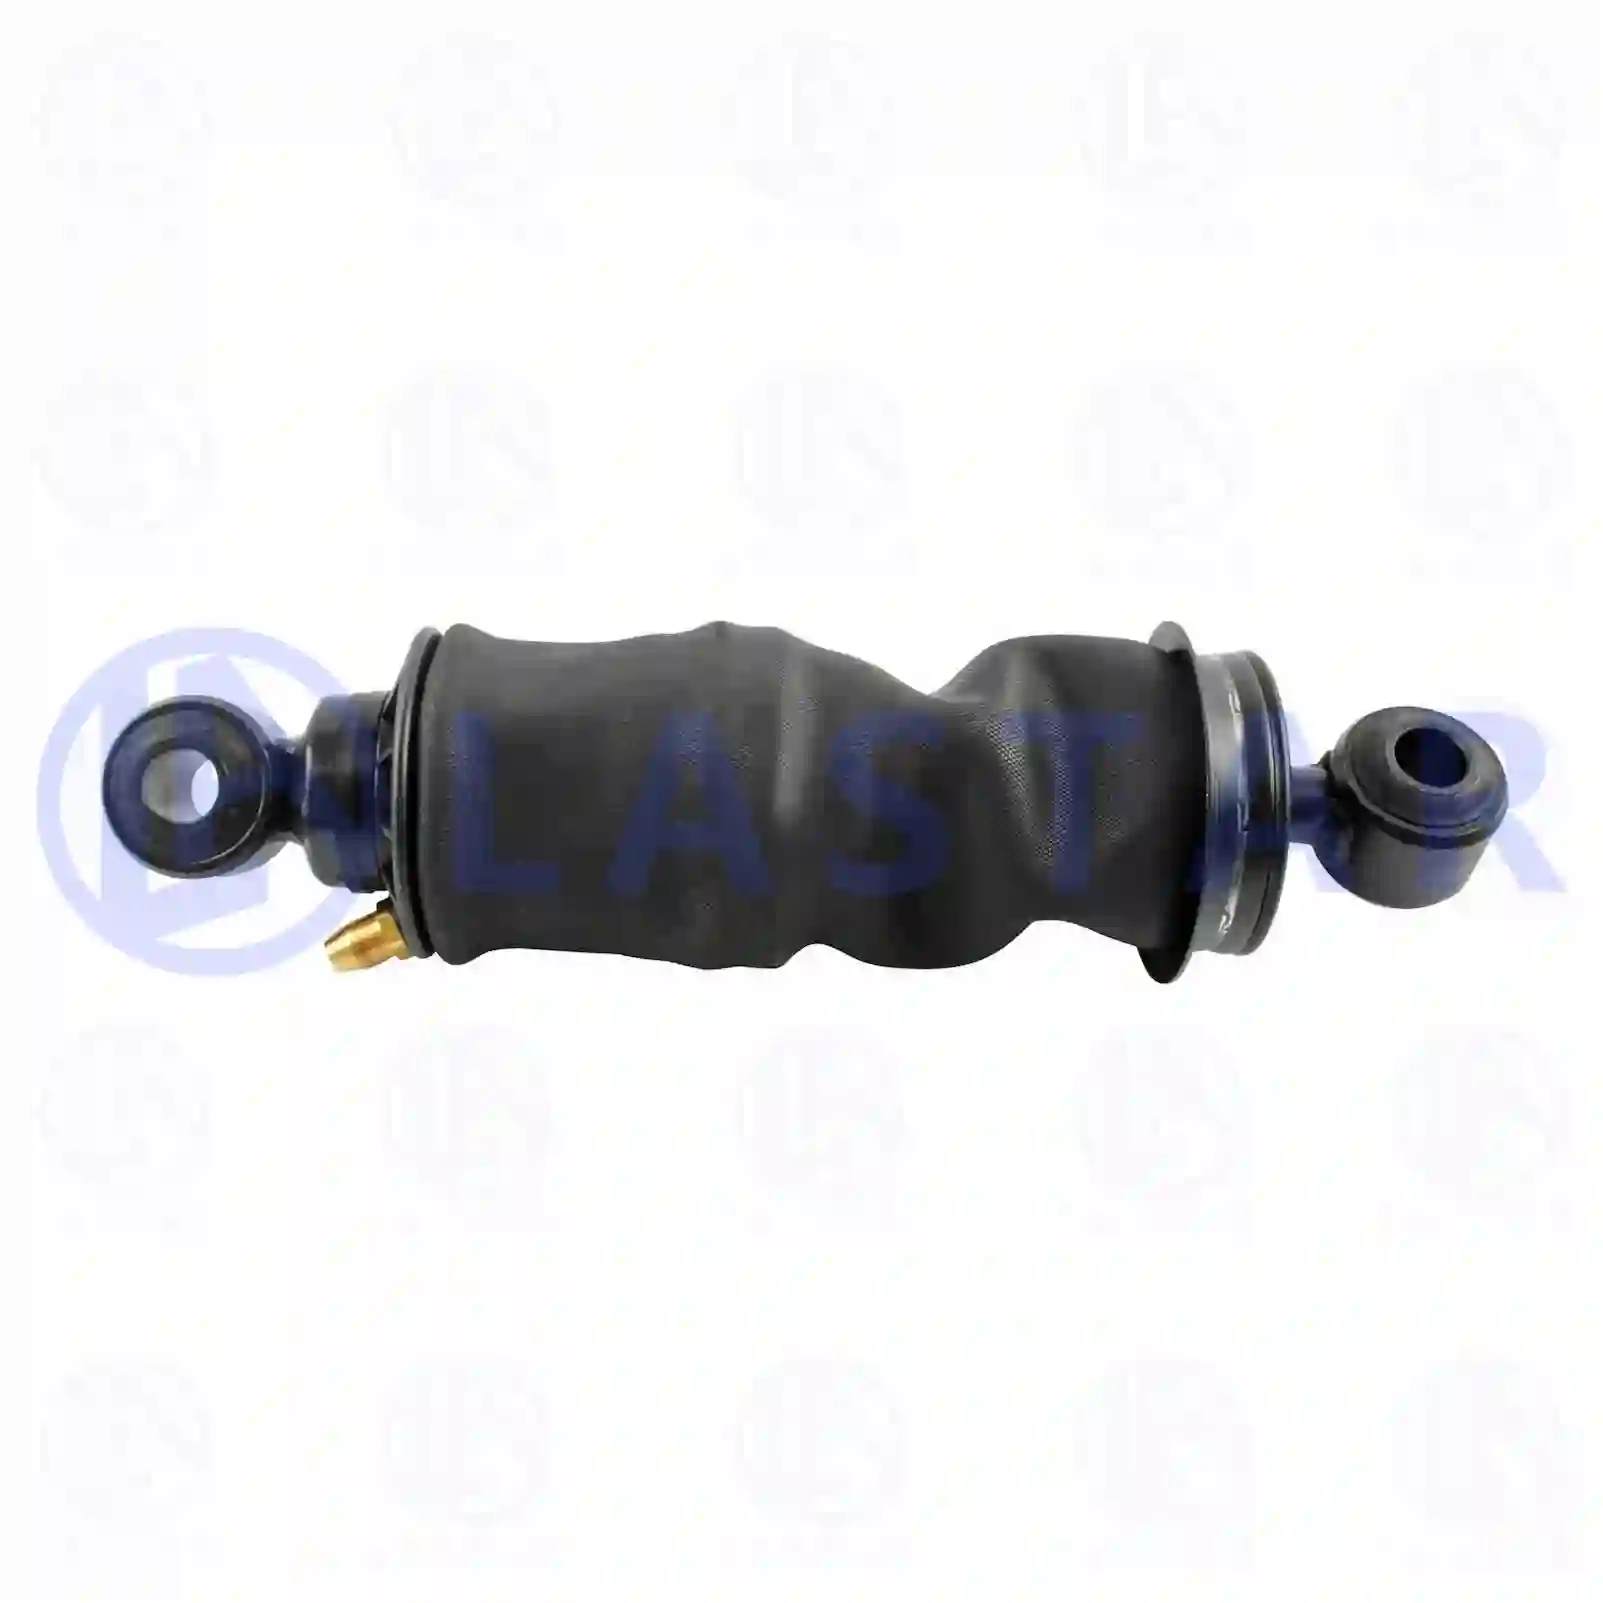 Cabin shock absorber, with air bellow, 77735597, 02997844, 2997844, 500357352, 97383886, ZG41225-0008 ||  77735597 Lastar Spare Part | Truck Spare Parts, Auotomotive Spare Parts Cabin shock absorber, with air bellow, 77735597, 02997844, 2997844, 500357352, 97383886, ZG41225-0008 ||  77735597 Lastar Spare Part | Truck Spare Parts, Auotomotive Spare Parts